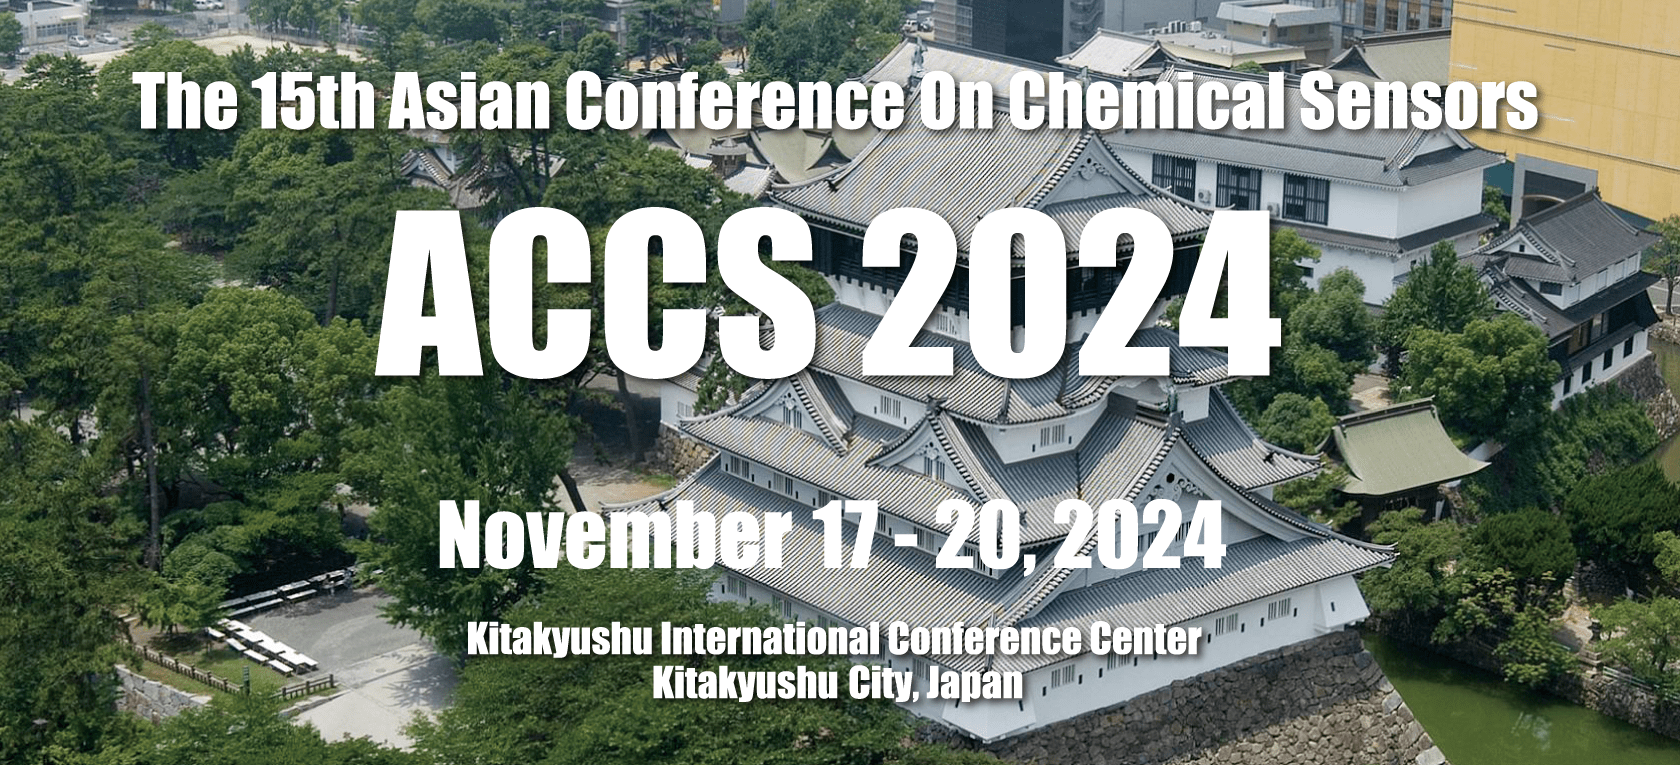 The 15th Asian Conference On Chemical Sensors